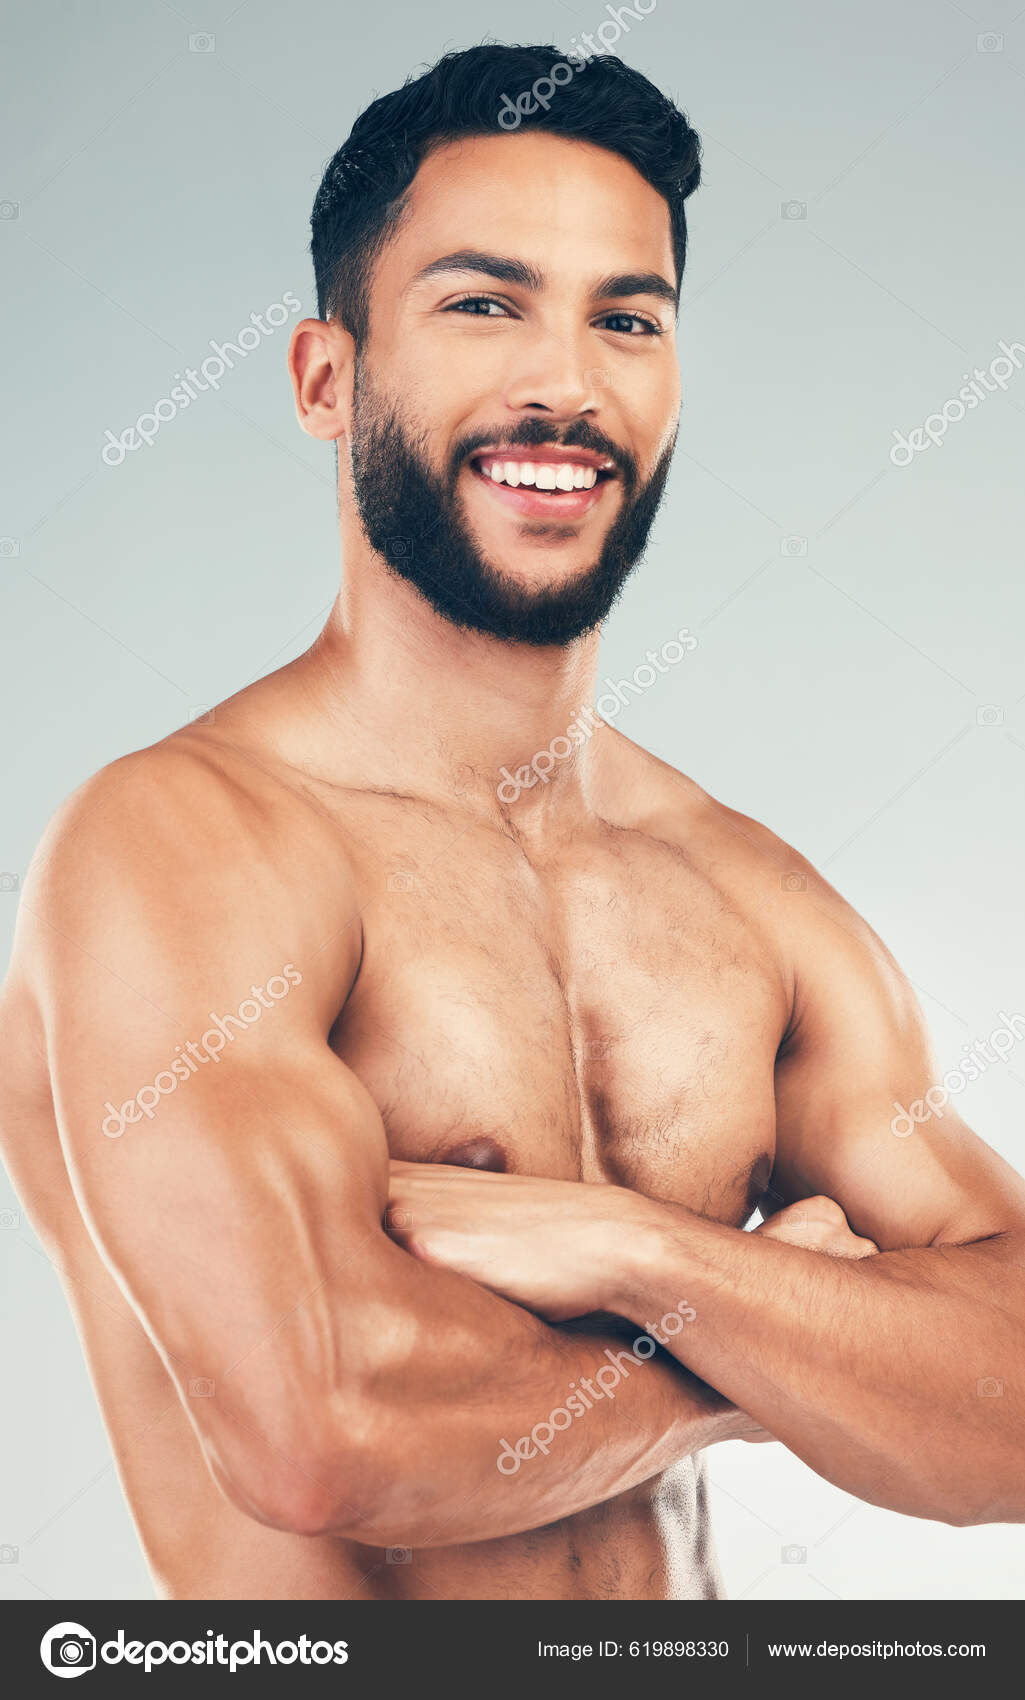 Foto Stock Health, fitness and body of a man in studio for health, wellness  and self care motivation for a healthy lifestyle. Strong aesthetic model in  underwear for exercise, training and workout